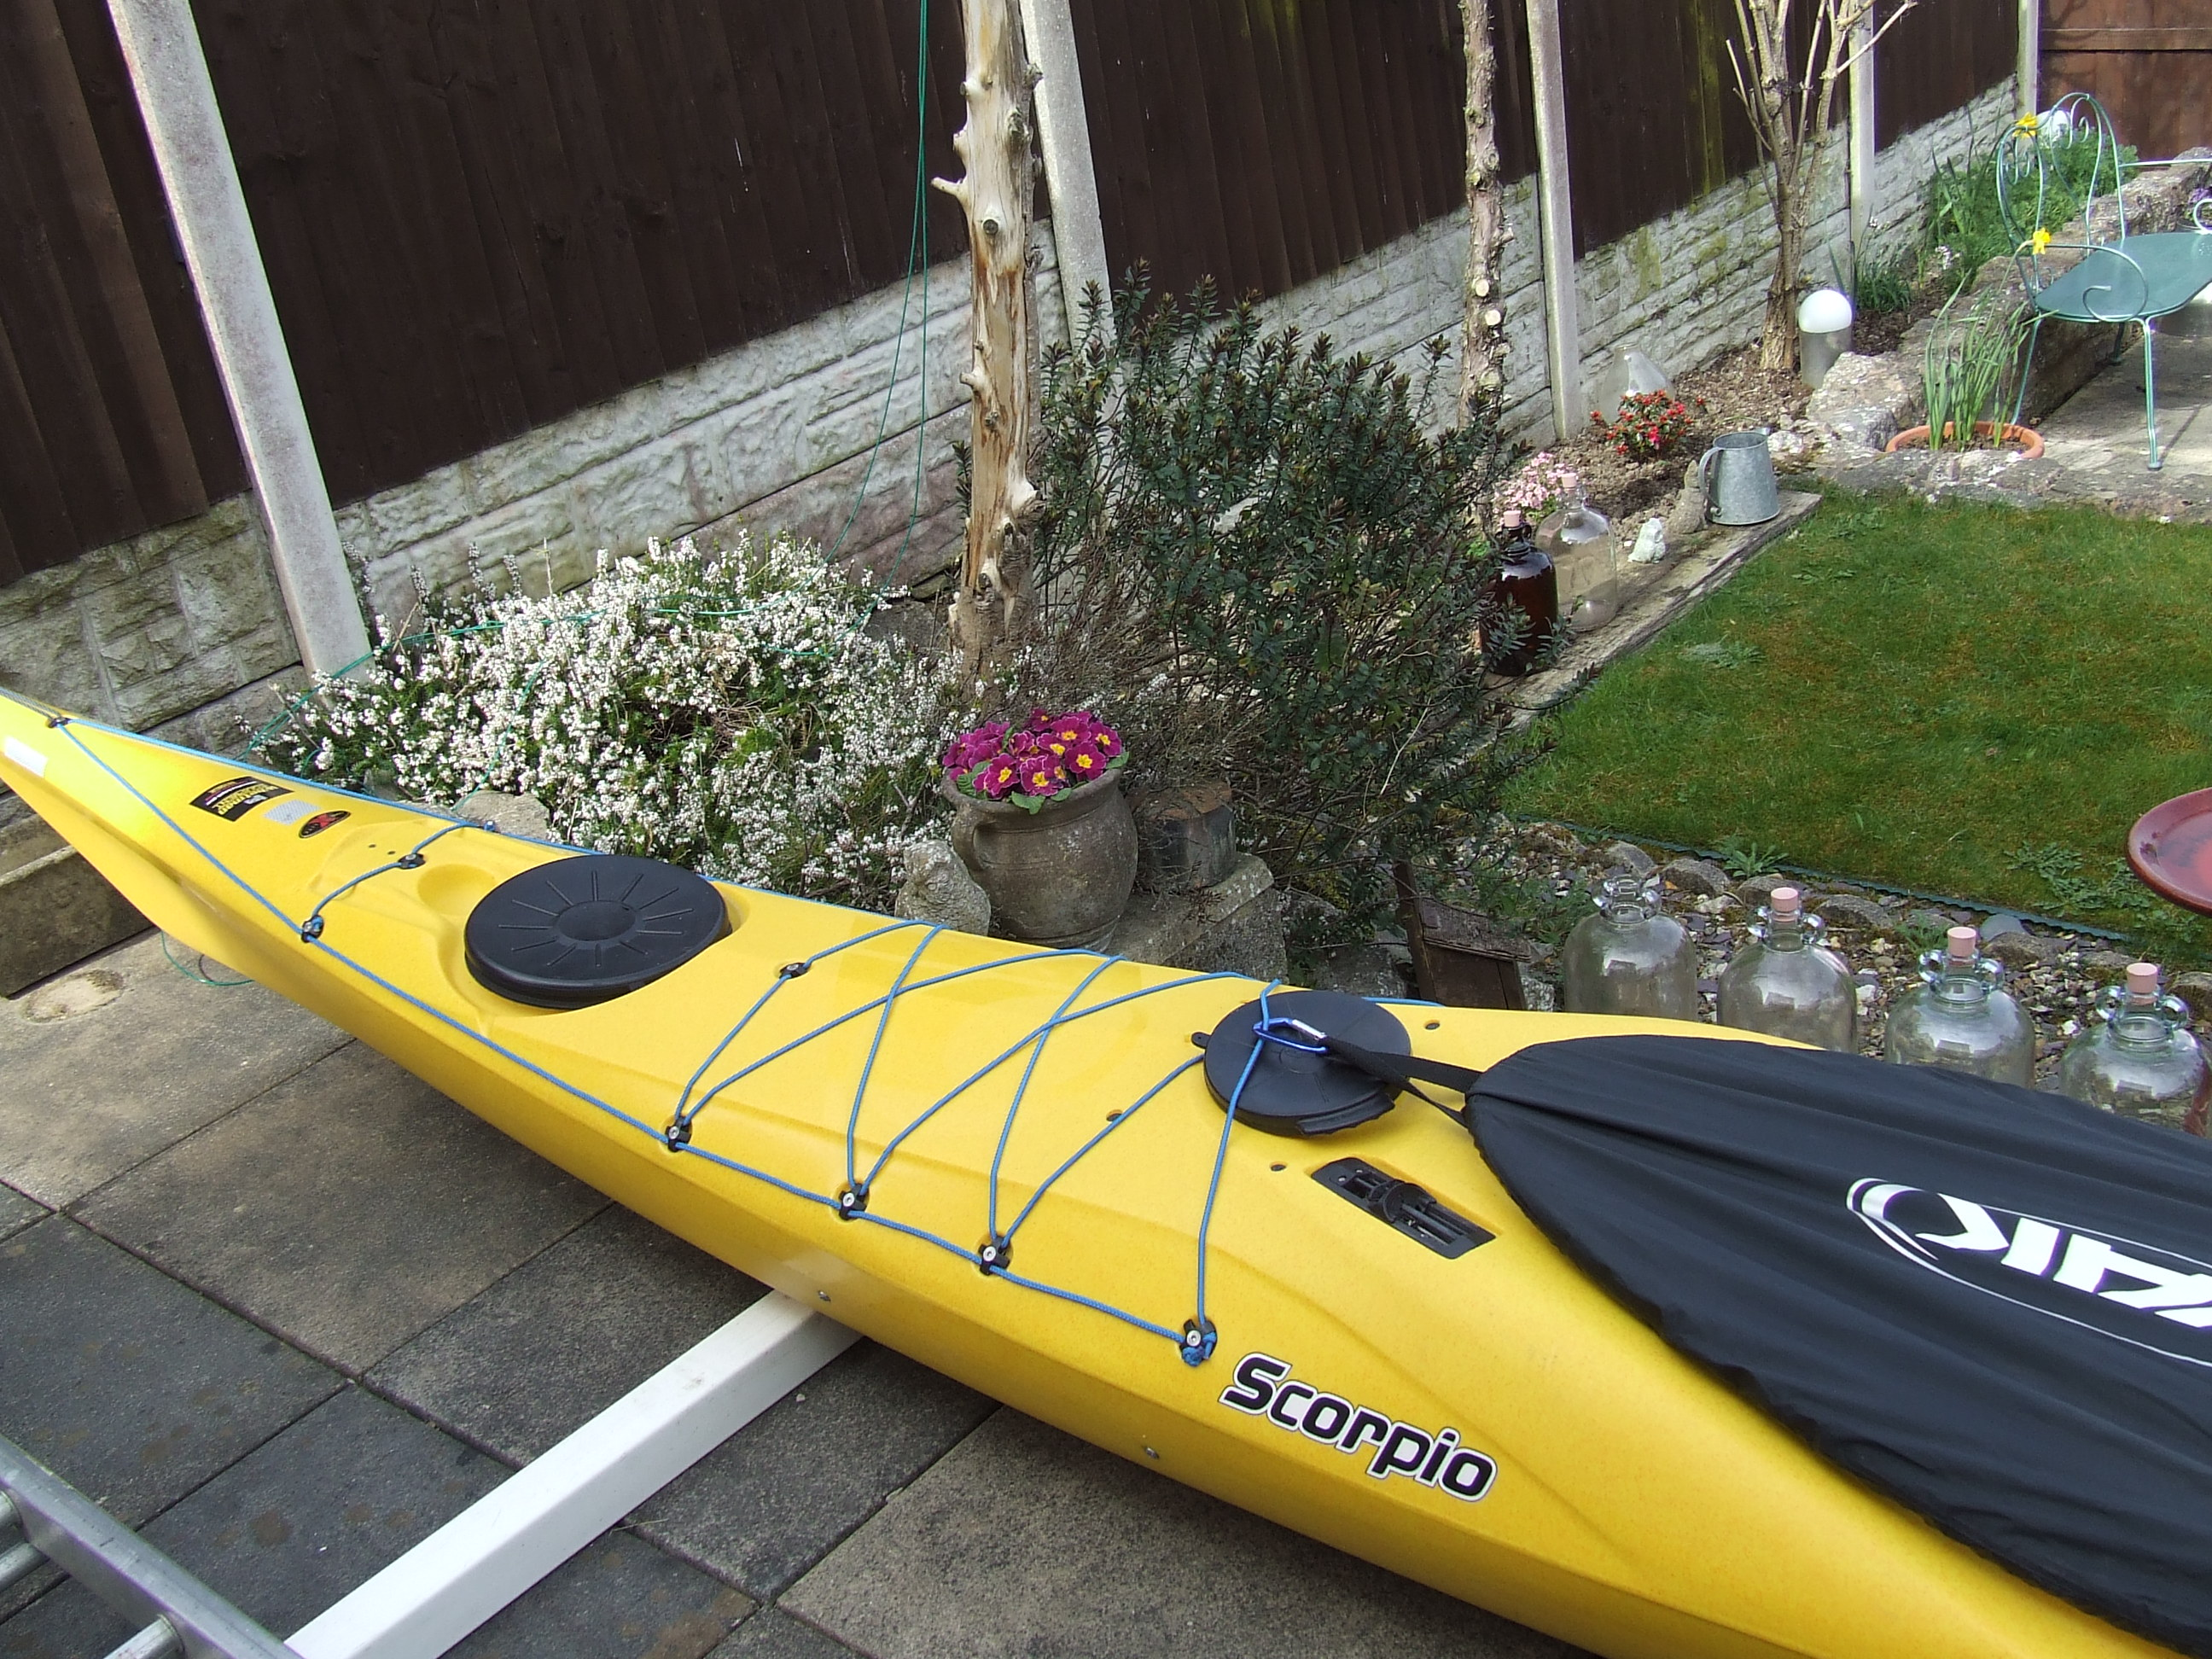 A yellow kayak on a deck

Description automatically generated with low confidence